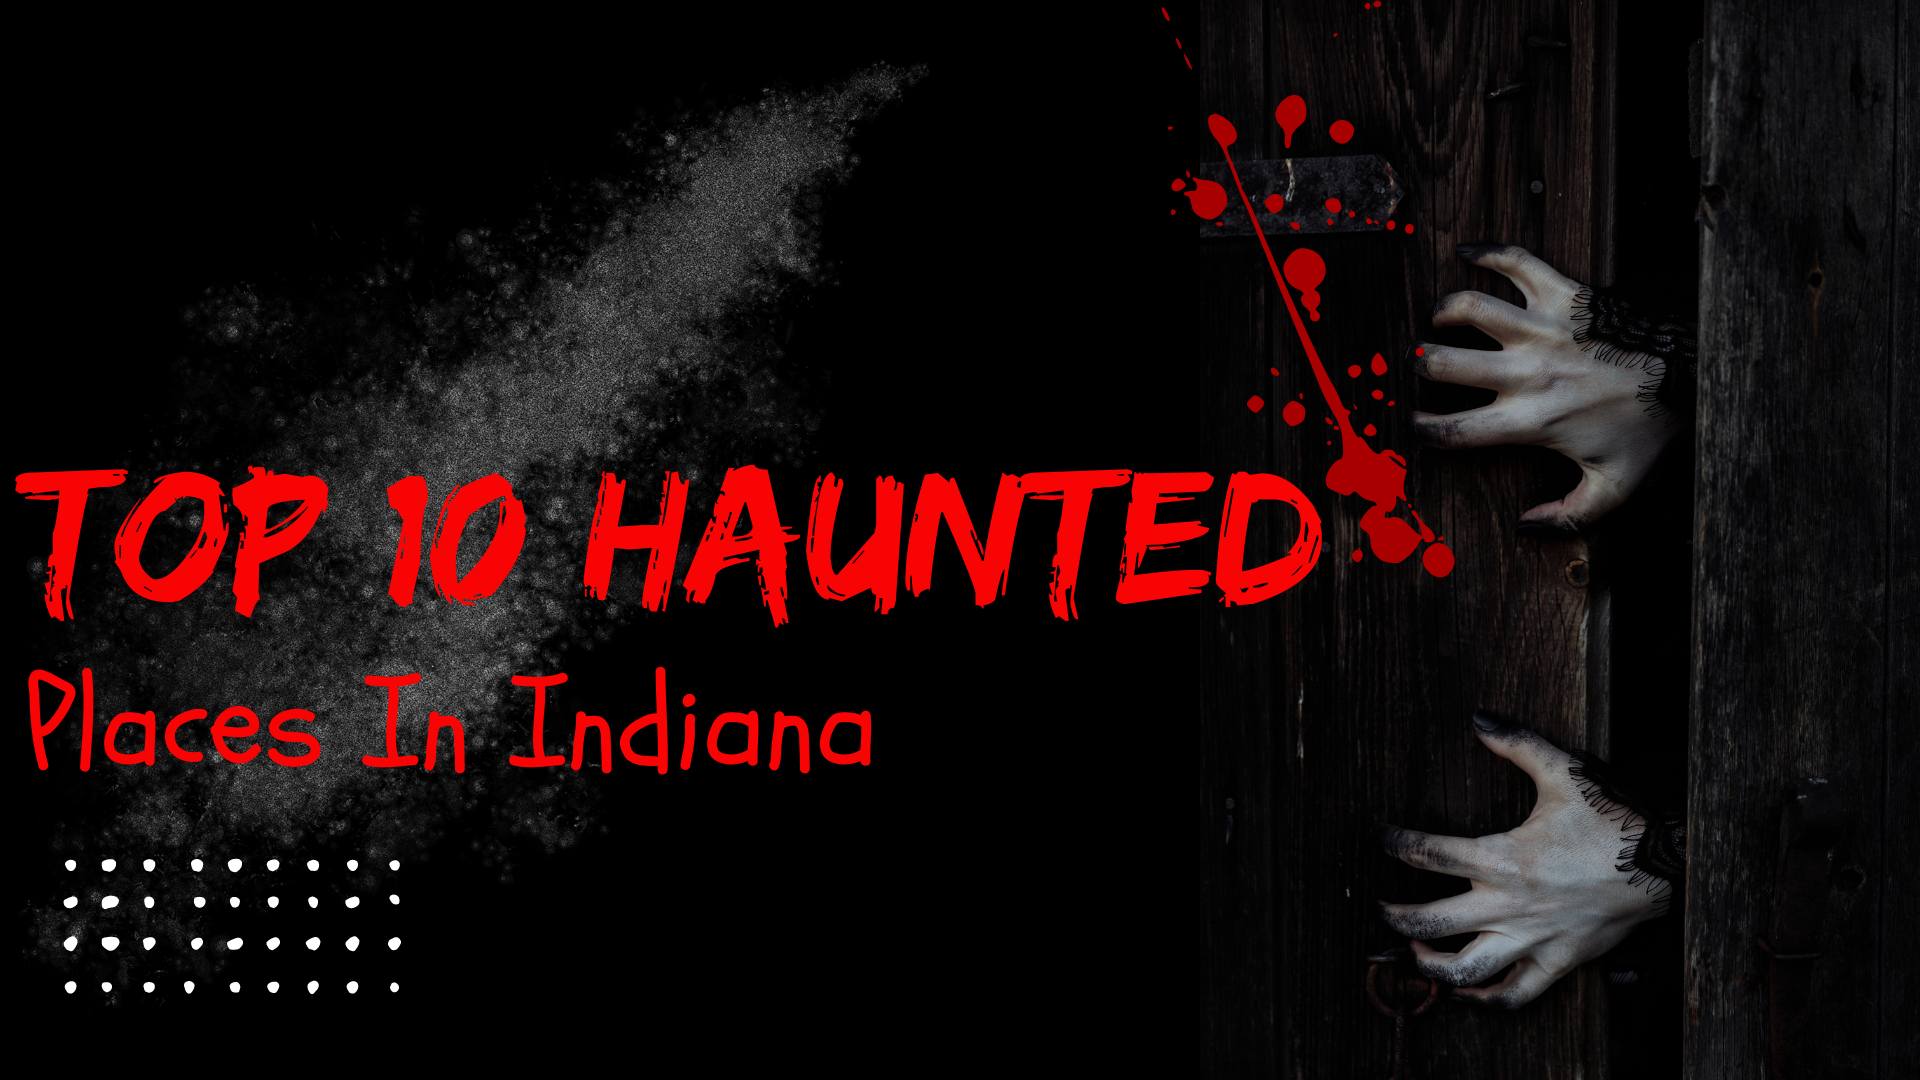 Top 10 Haunted Places in Indiana